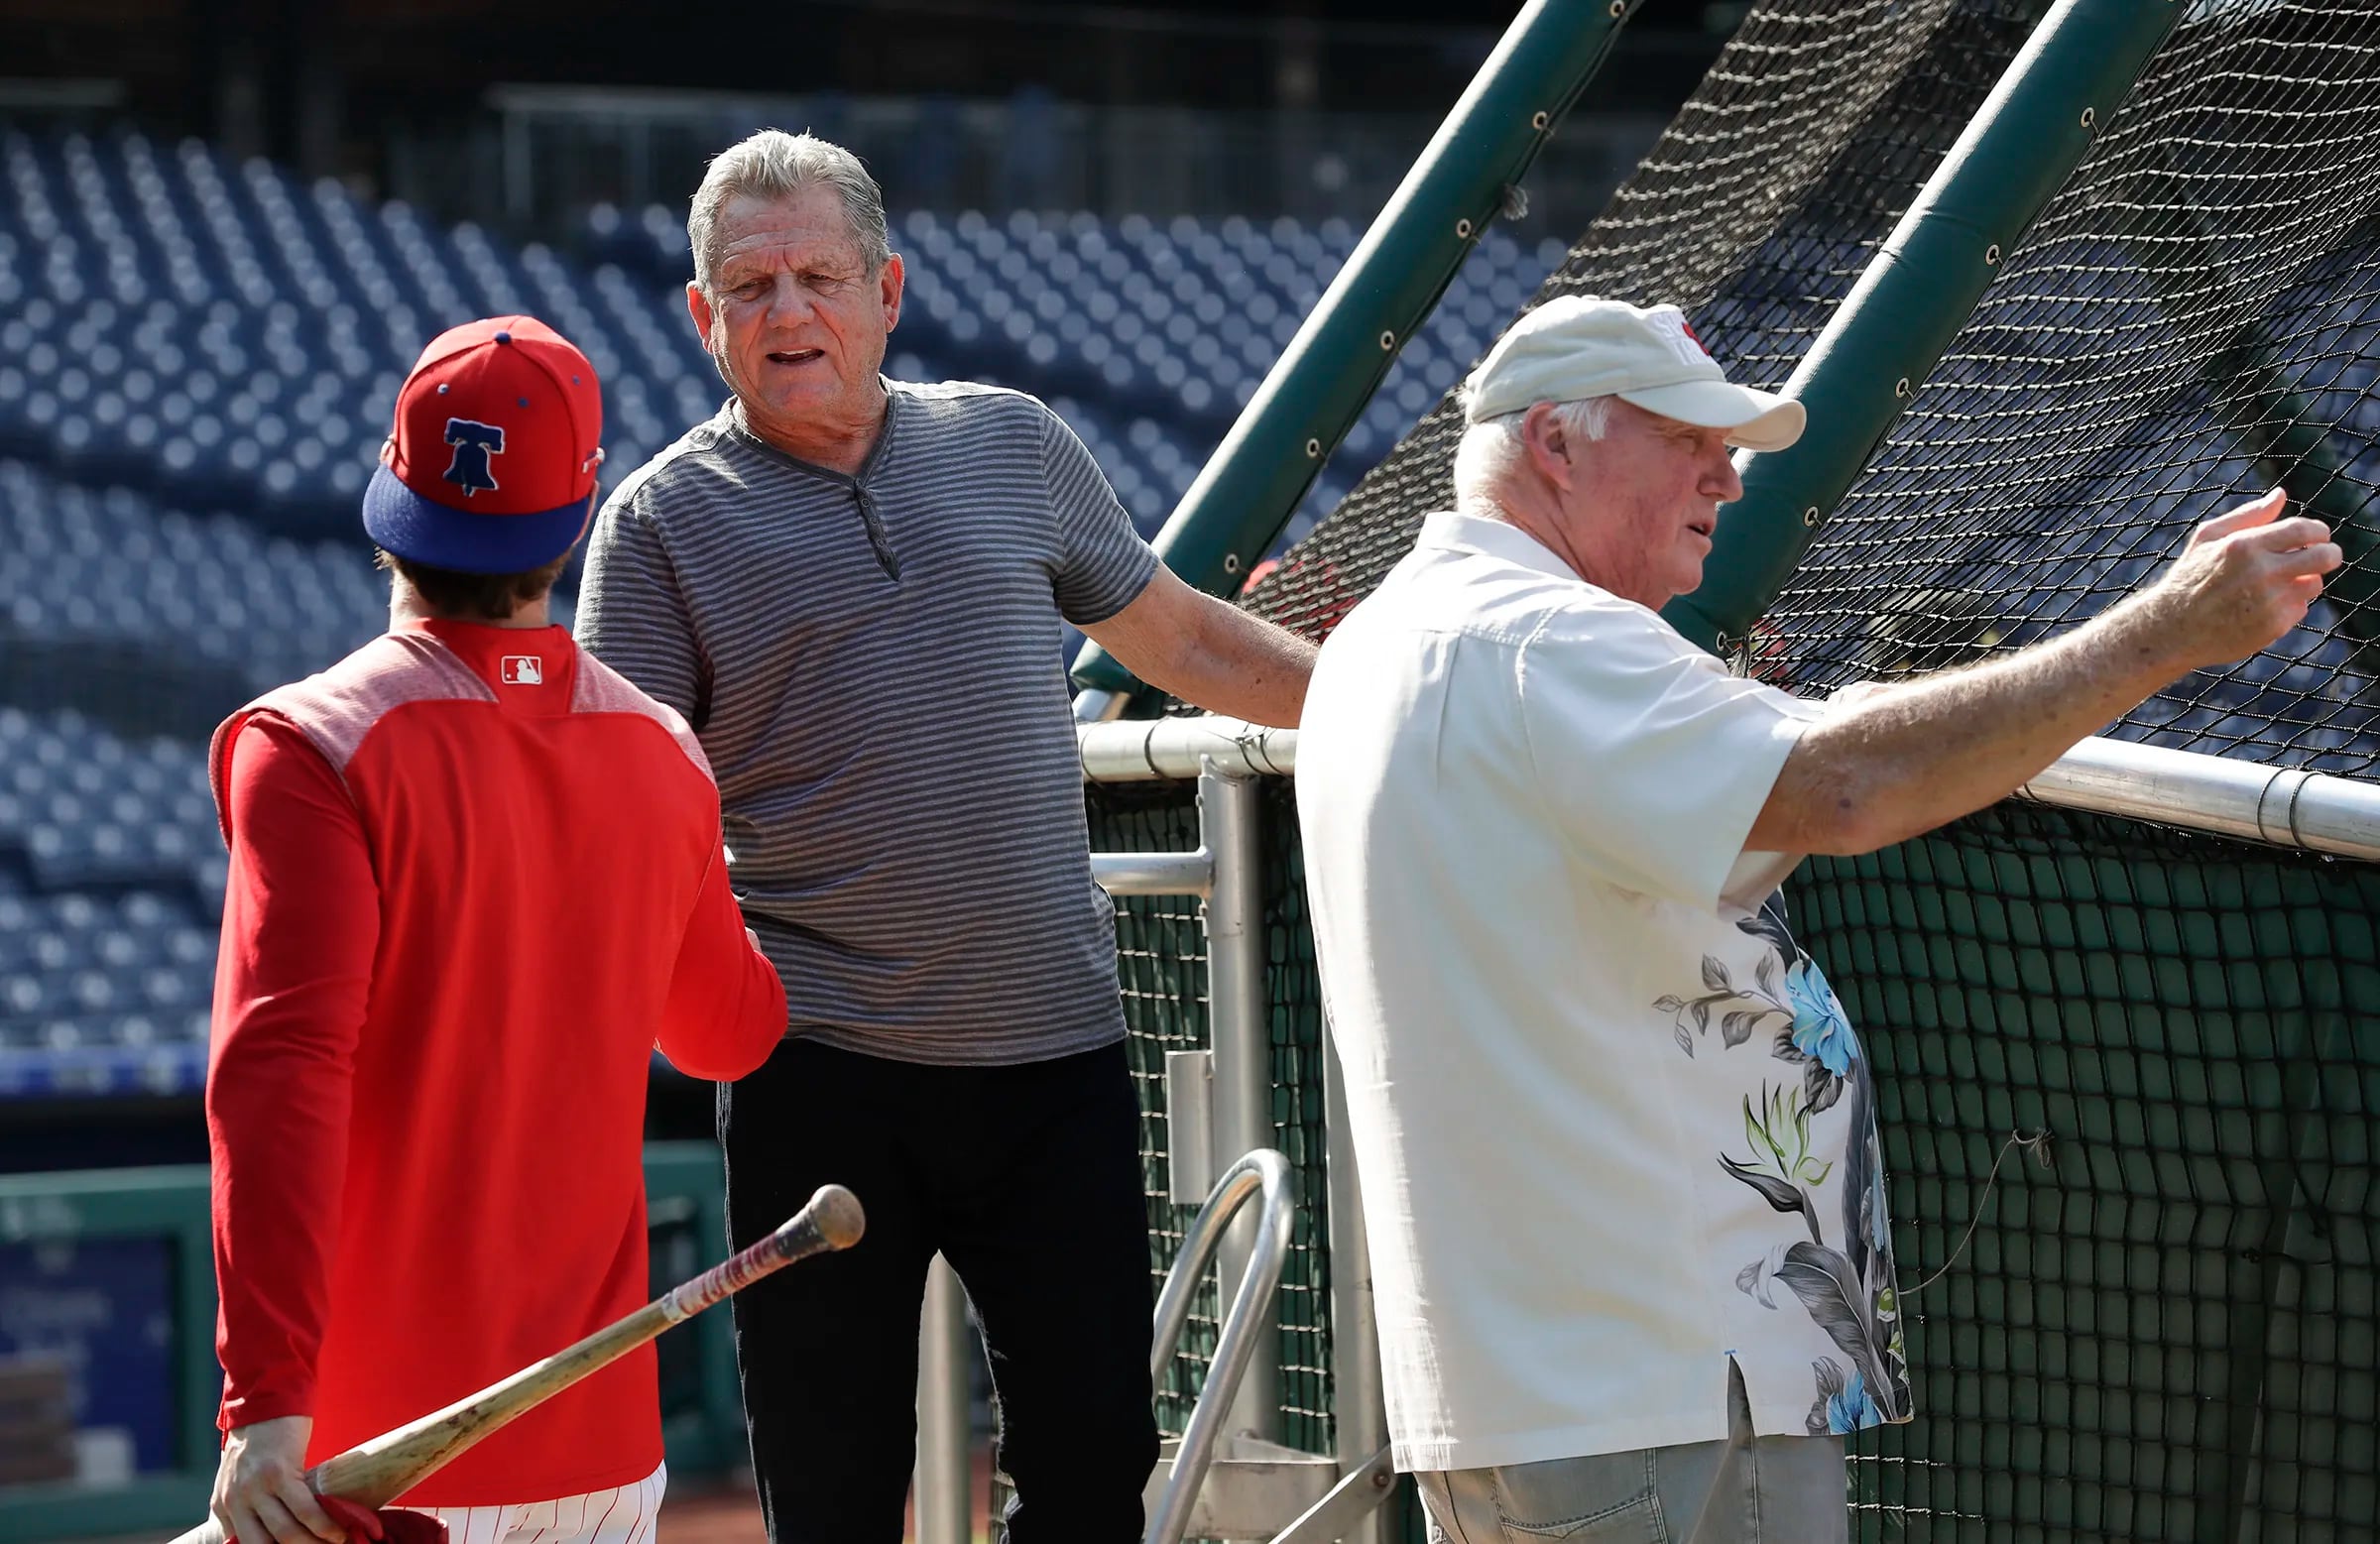 Phillies legends Charlie Manuel, Larry Bowa coach Warwick youth